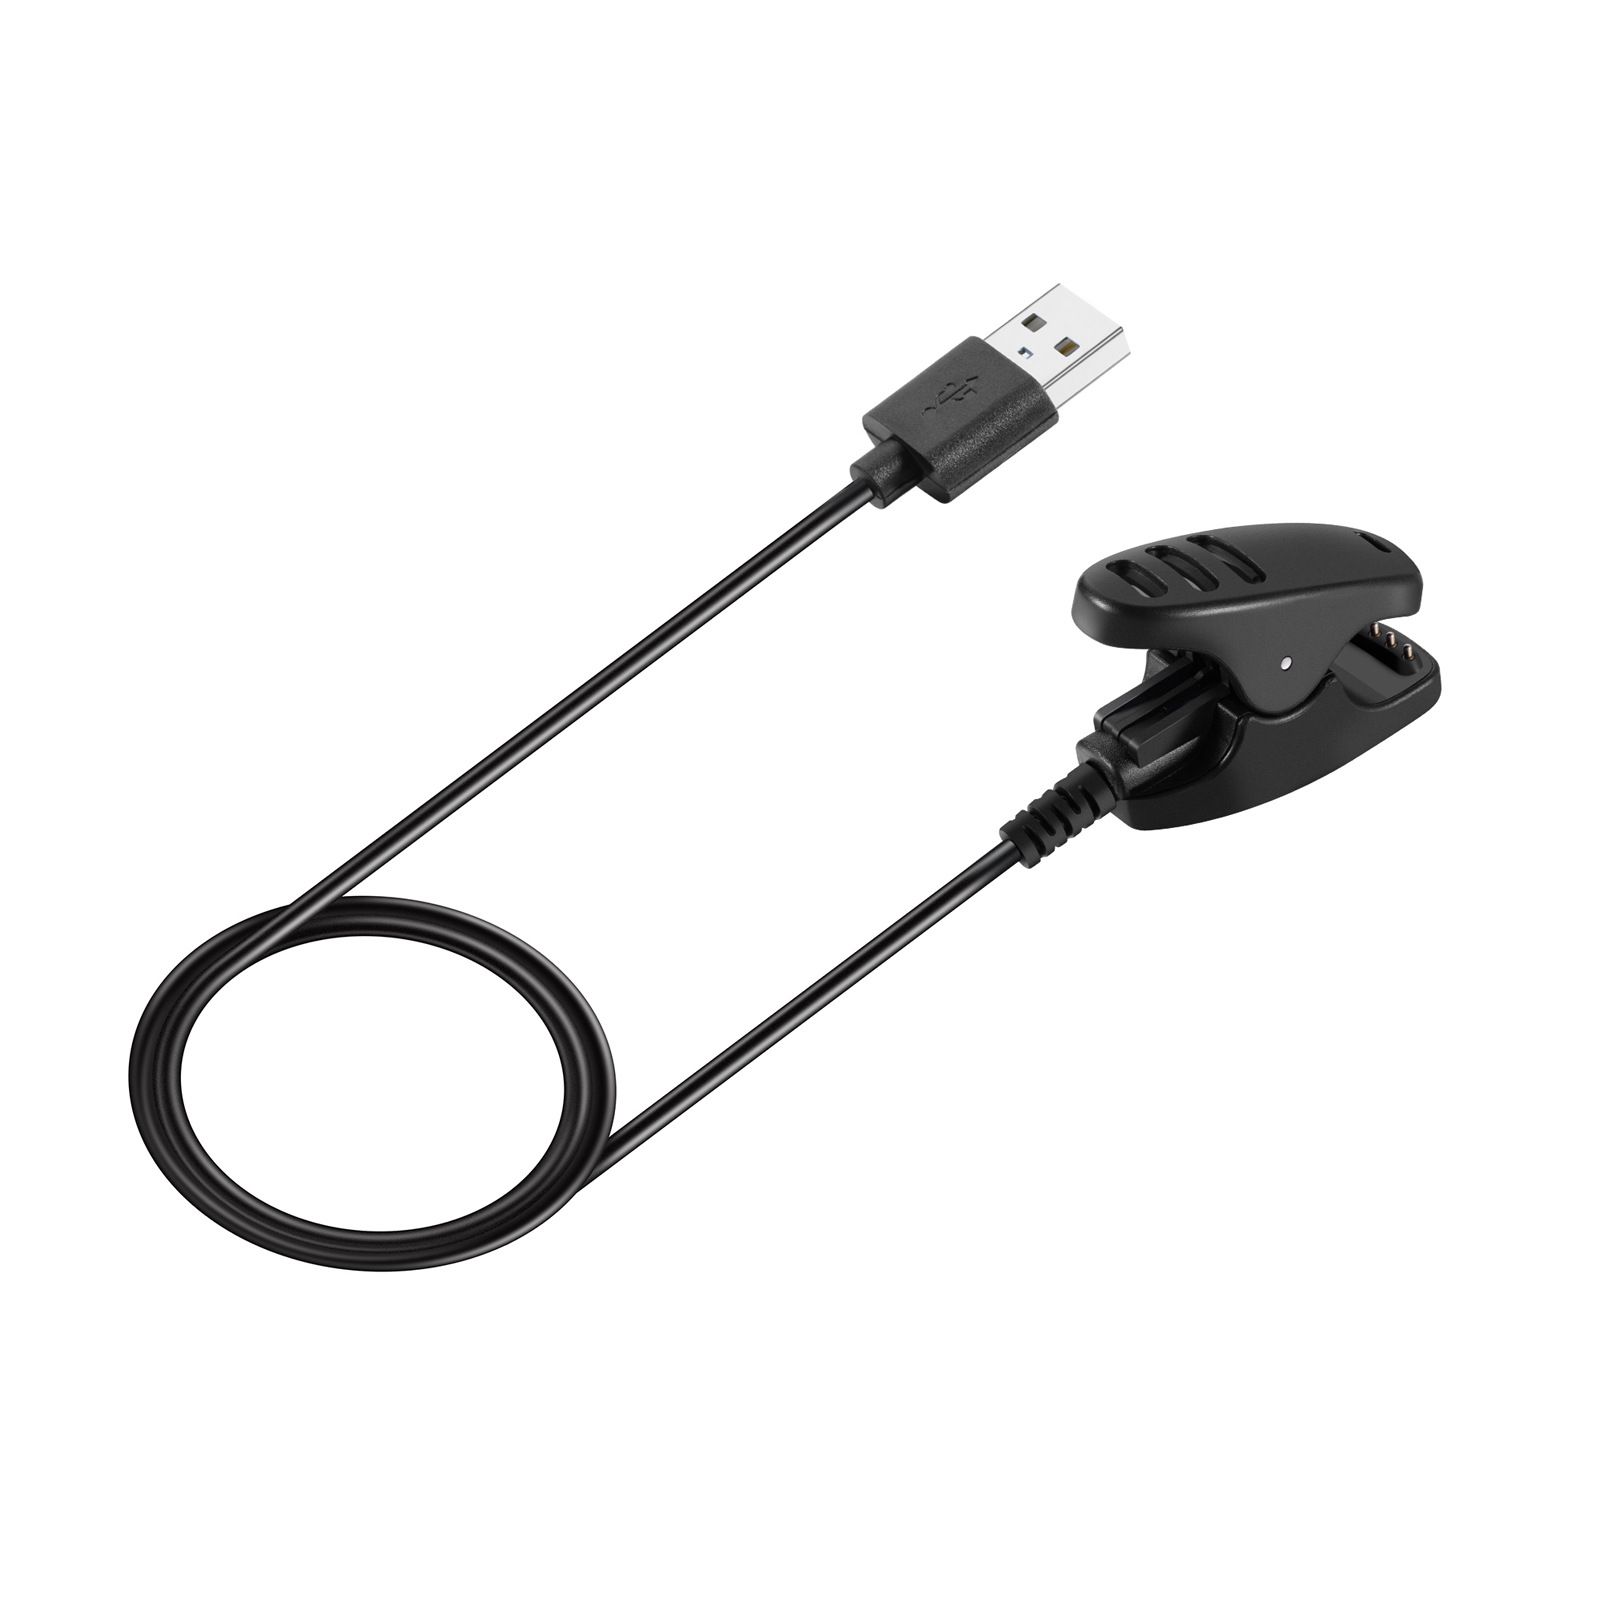 Bakeey-1m-Charging-Clip-USB-Watch-Charging-Cable-Date-Function-For-Suunto-3-FitnessSuunto-5-1757621